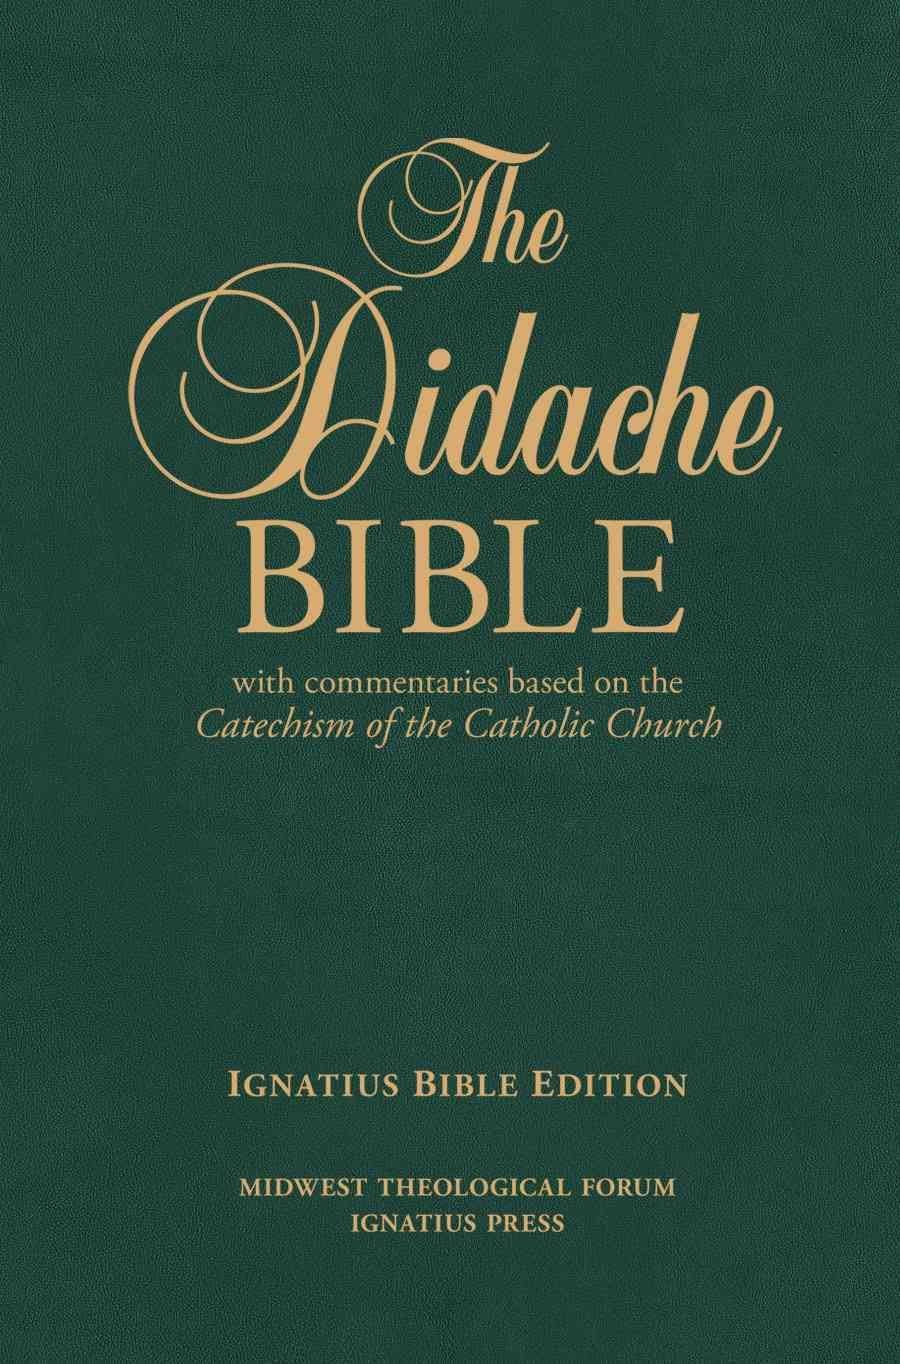 The Didache Bible with Commentaries Based on the Catechism of the Catholic Church - Ignatius Press